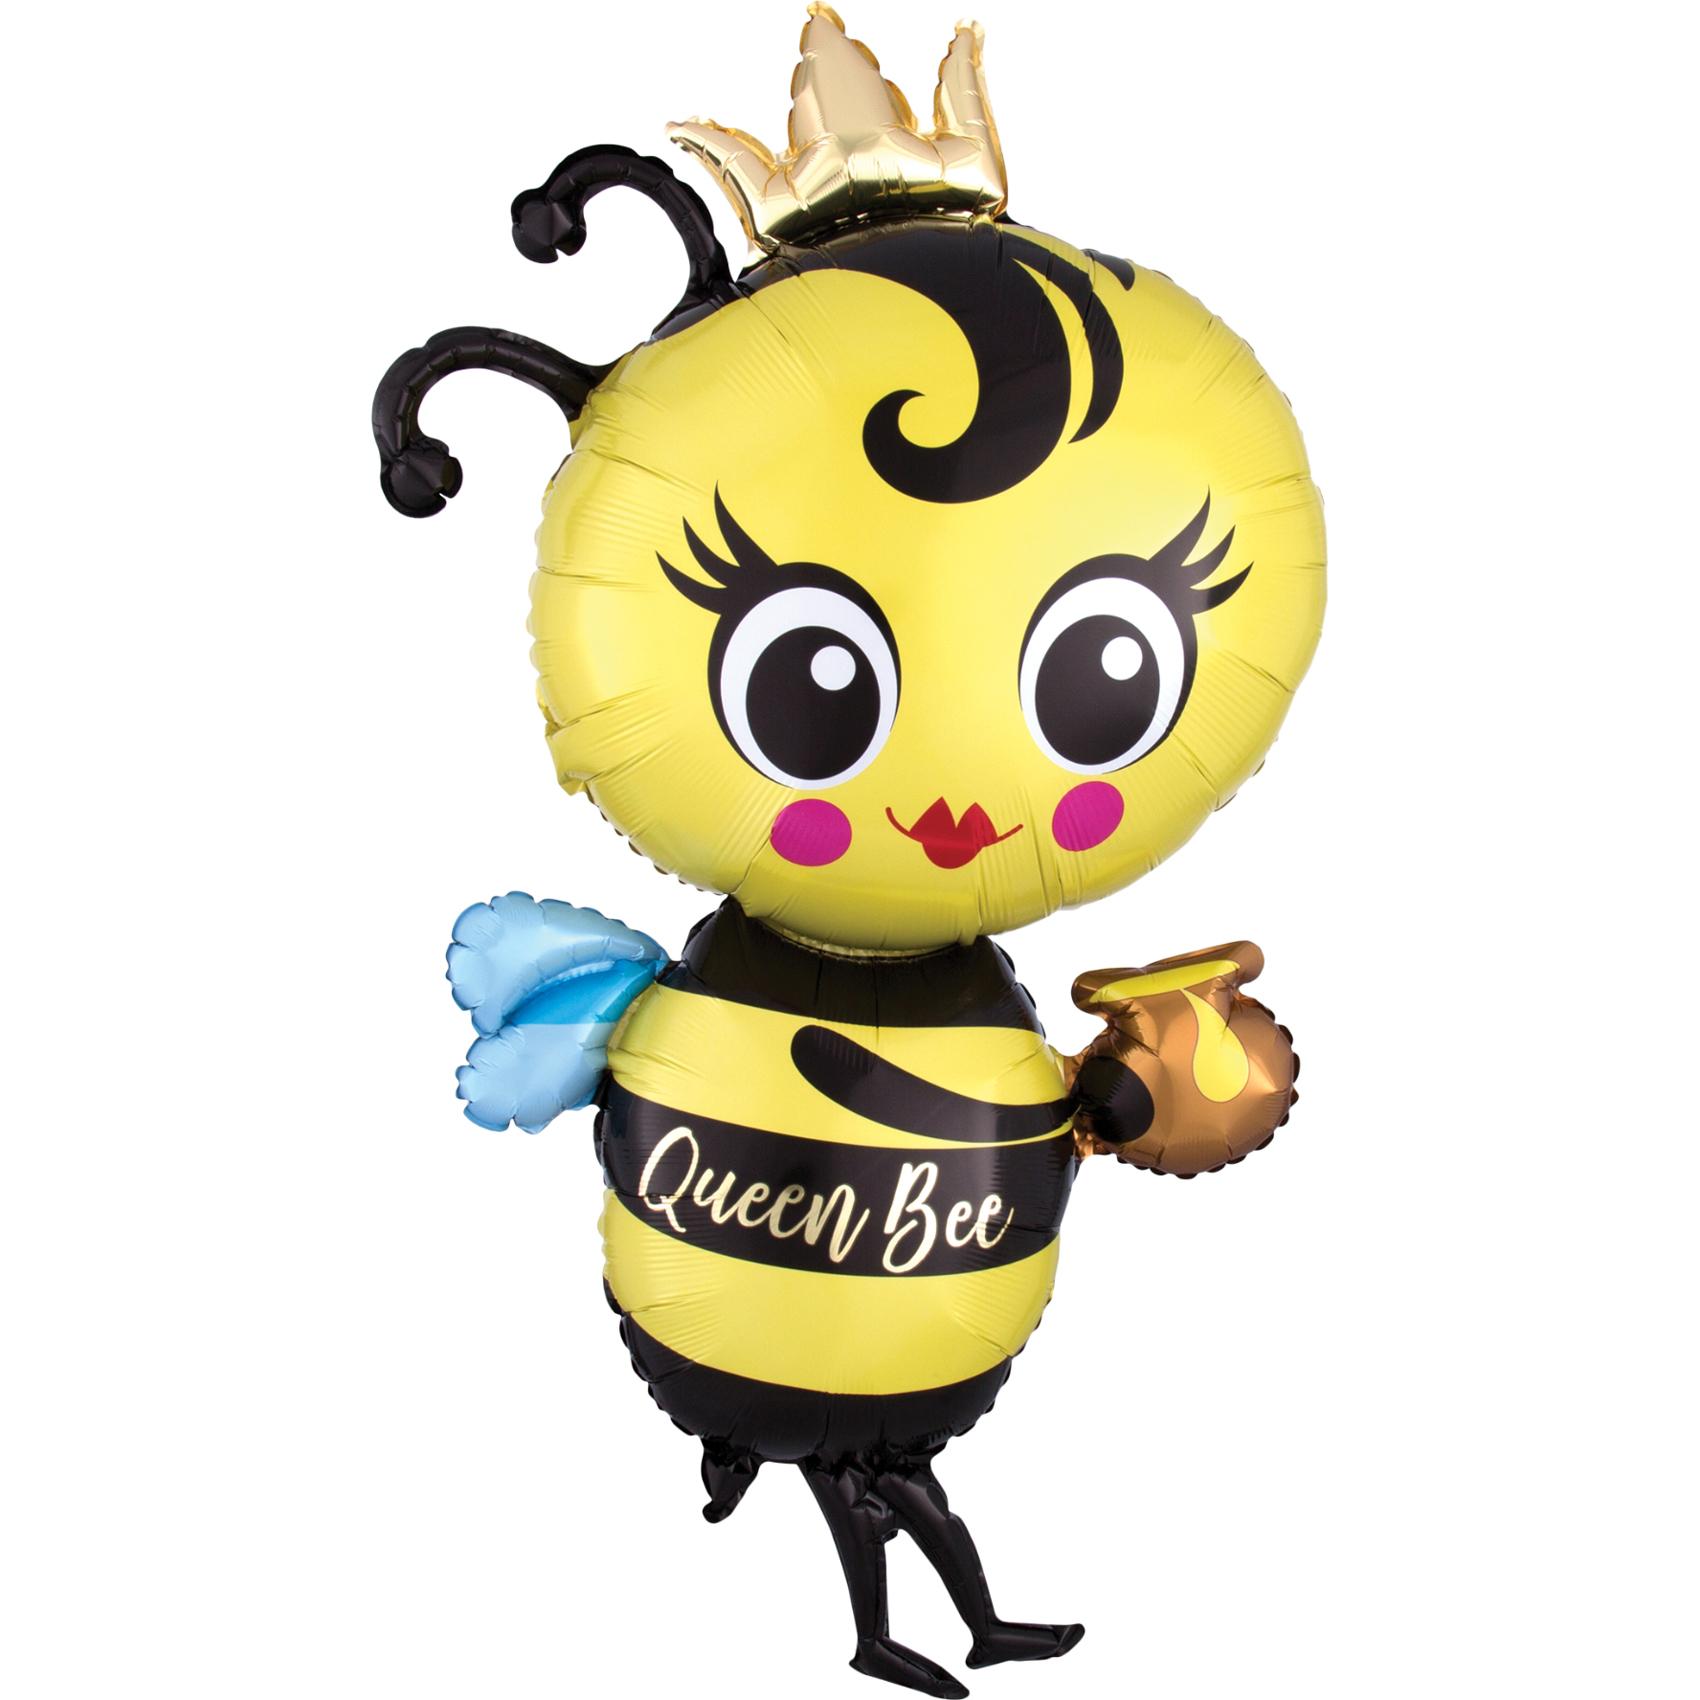 Queen Bee SuperShape Foil Balloon 58x101cm Balloons & Streamers - Party Centre